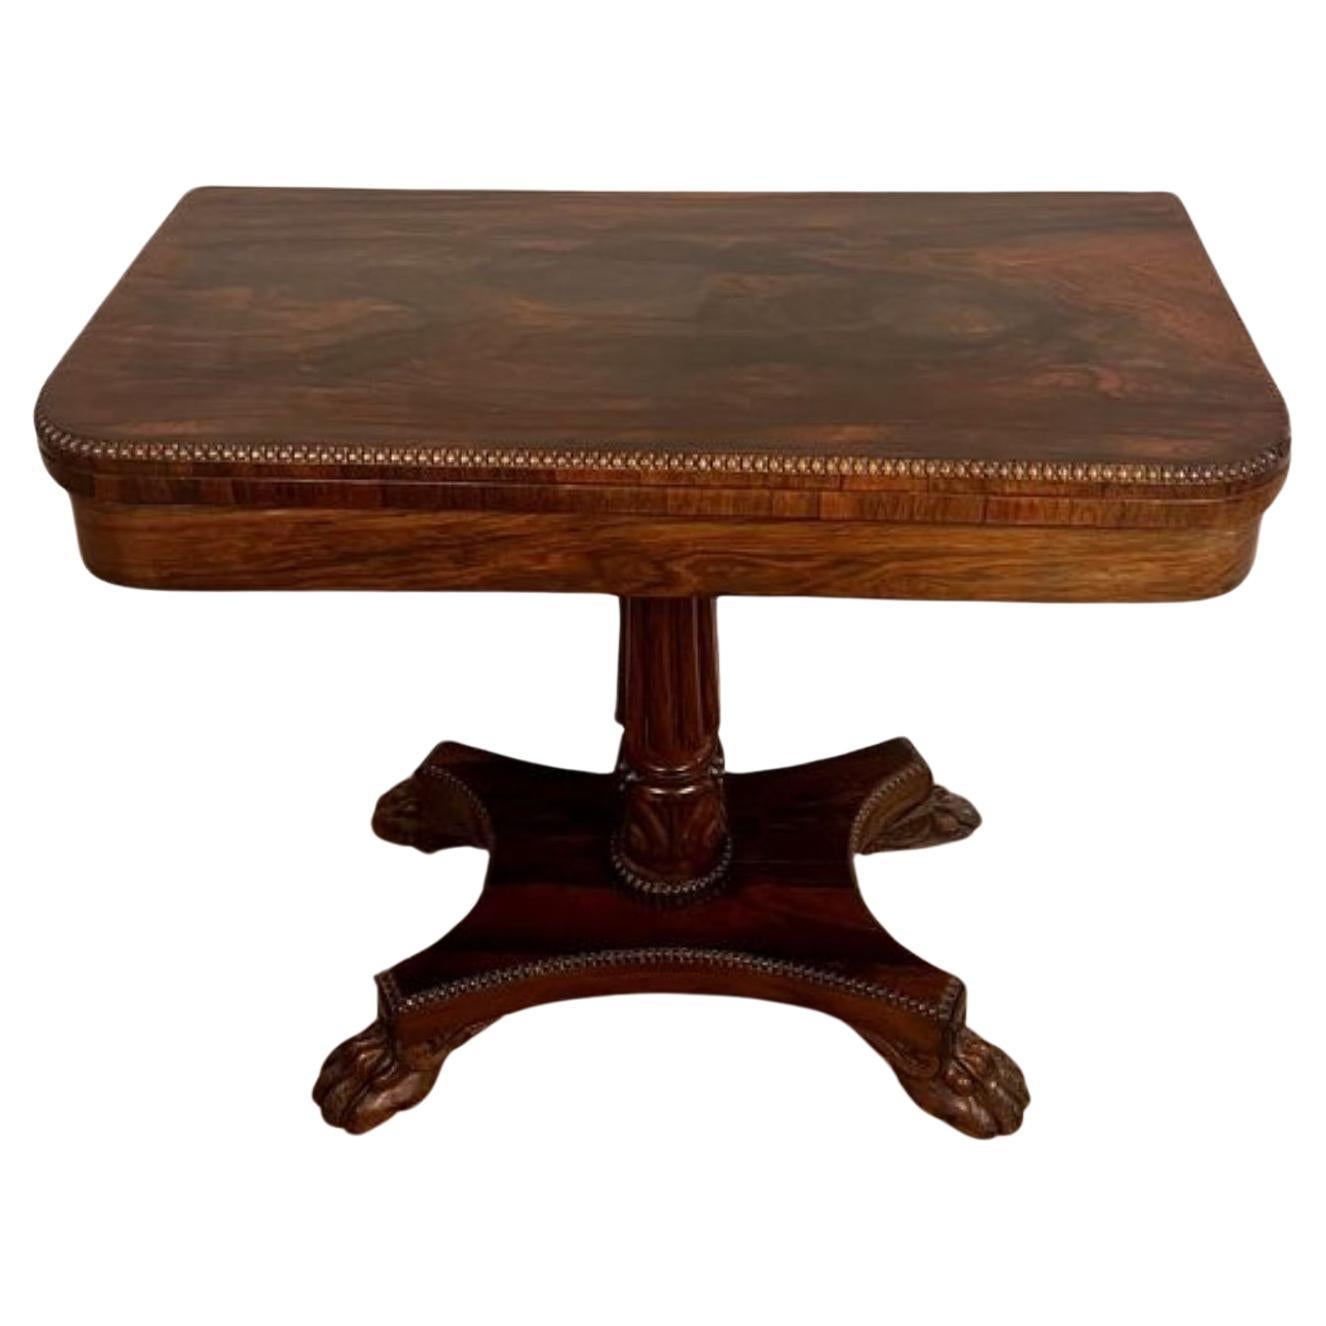 Wonderful antique Regency quality rosewood card table 